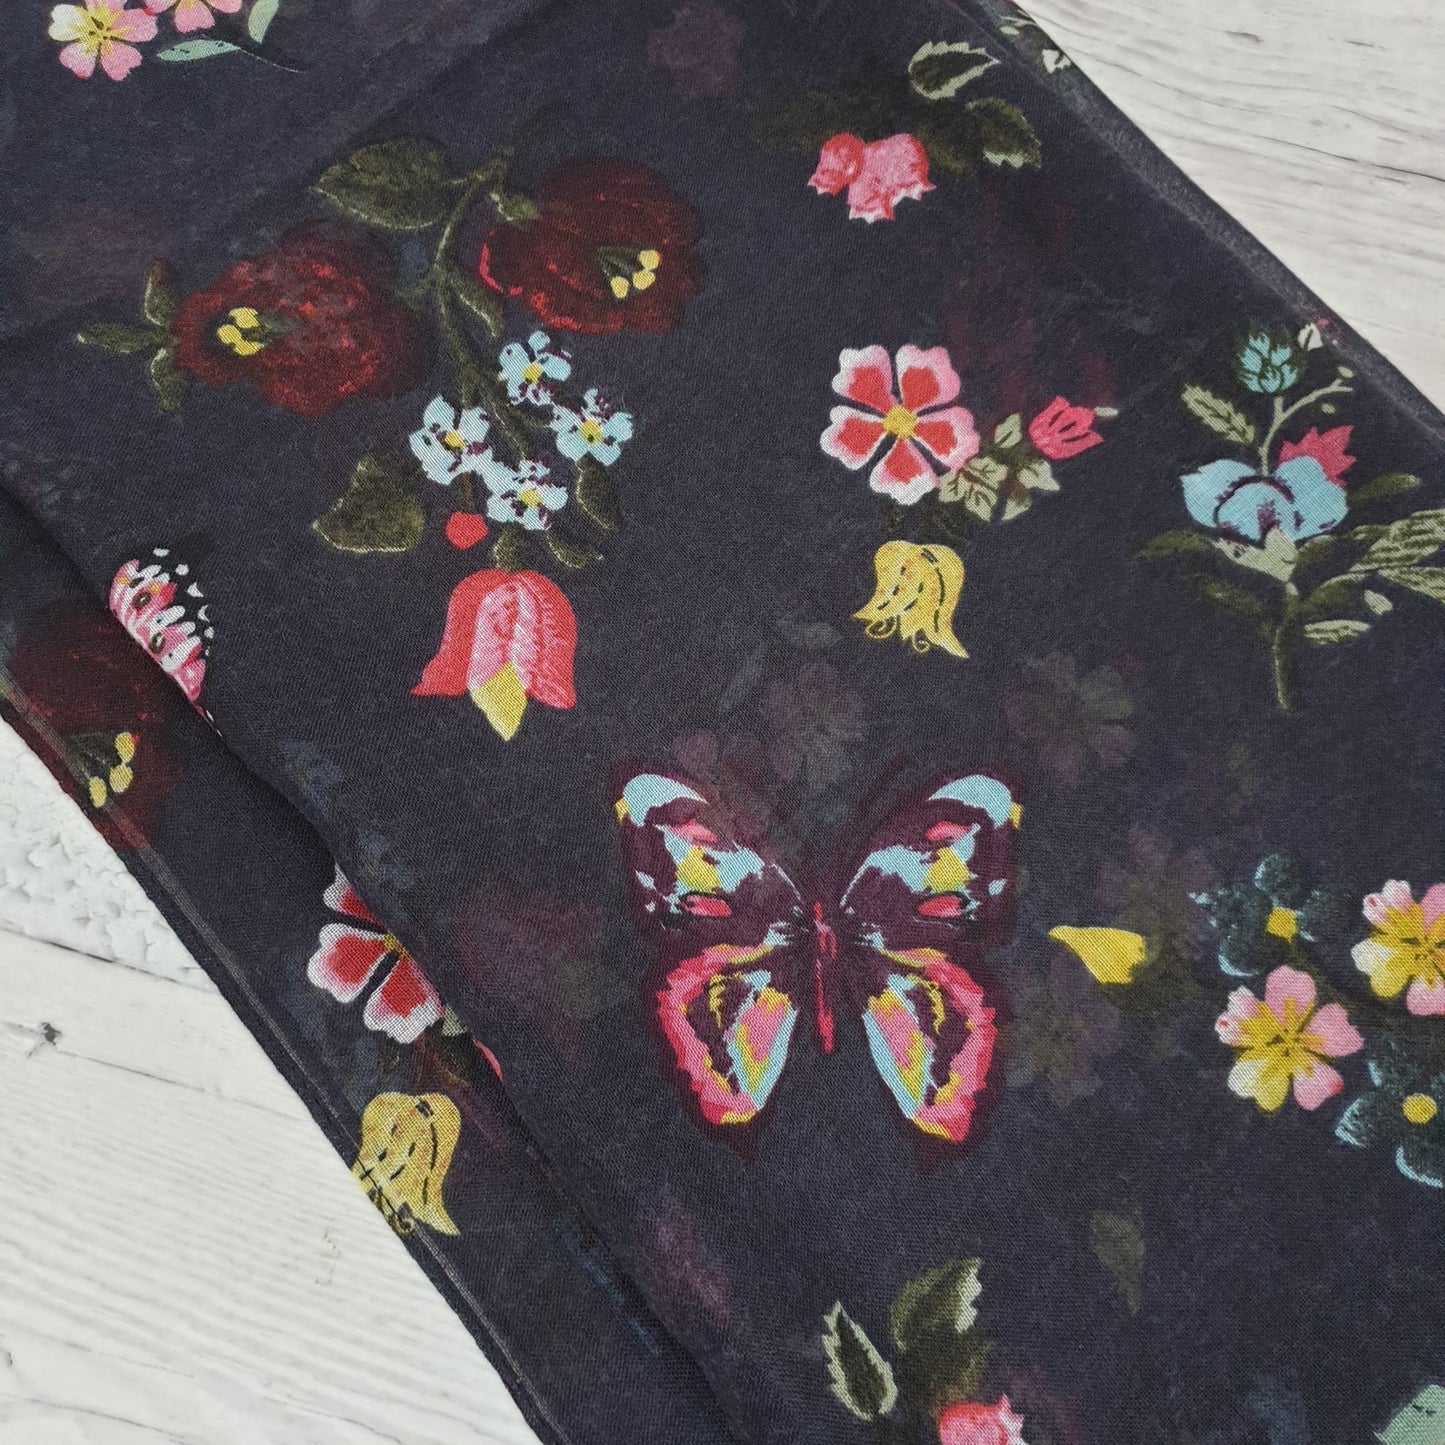 Photo of a black scarf decorated with yellow, pink and blue flowers and butterflies